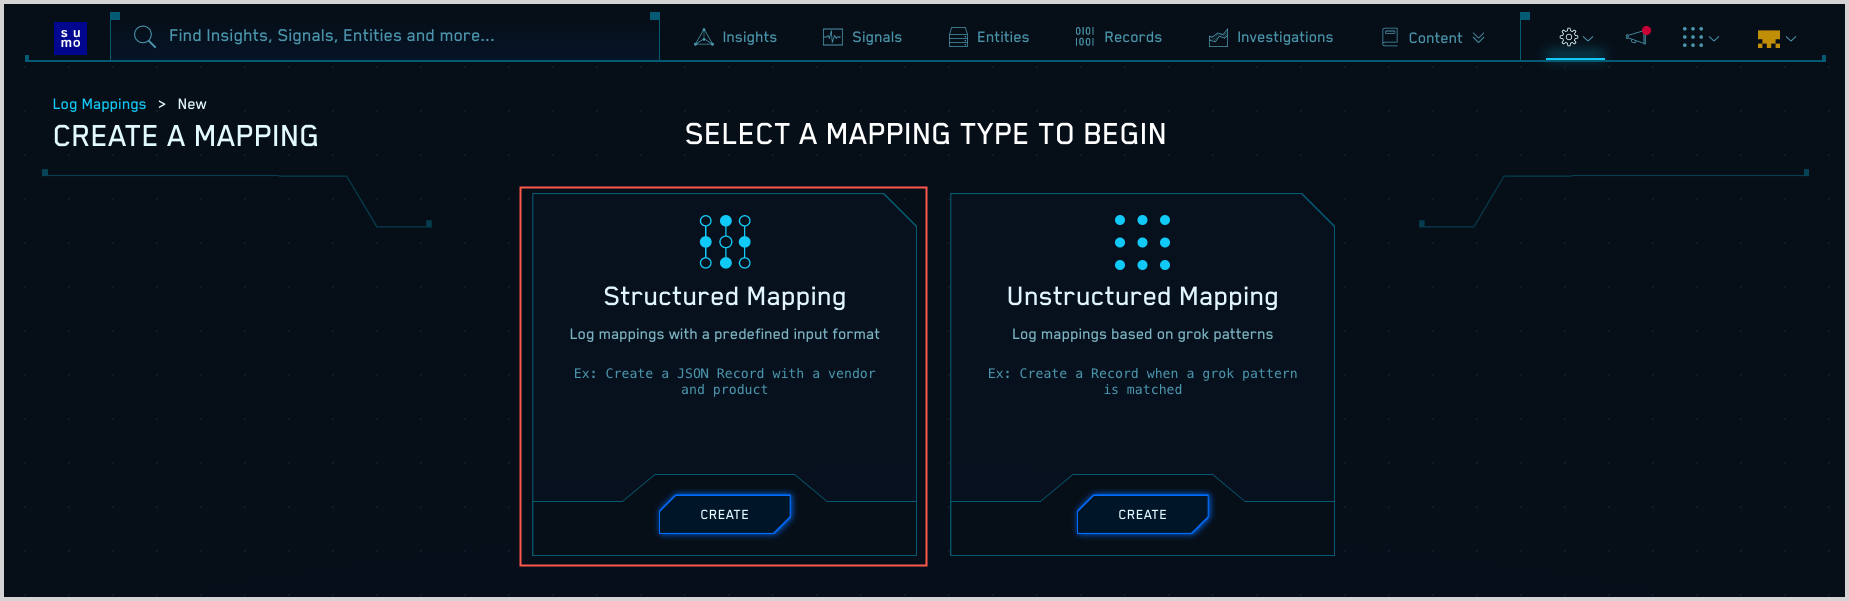 select-mapping-type.png